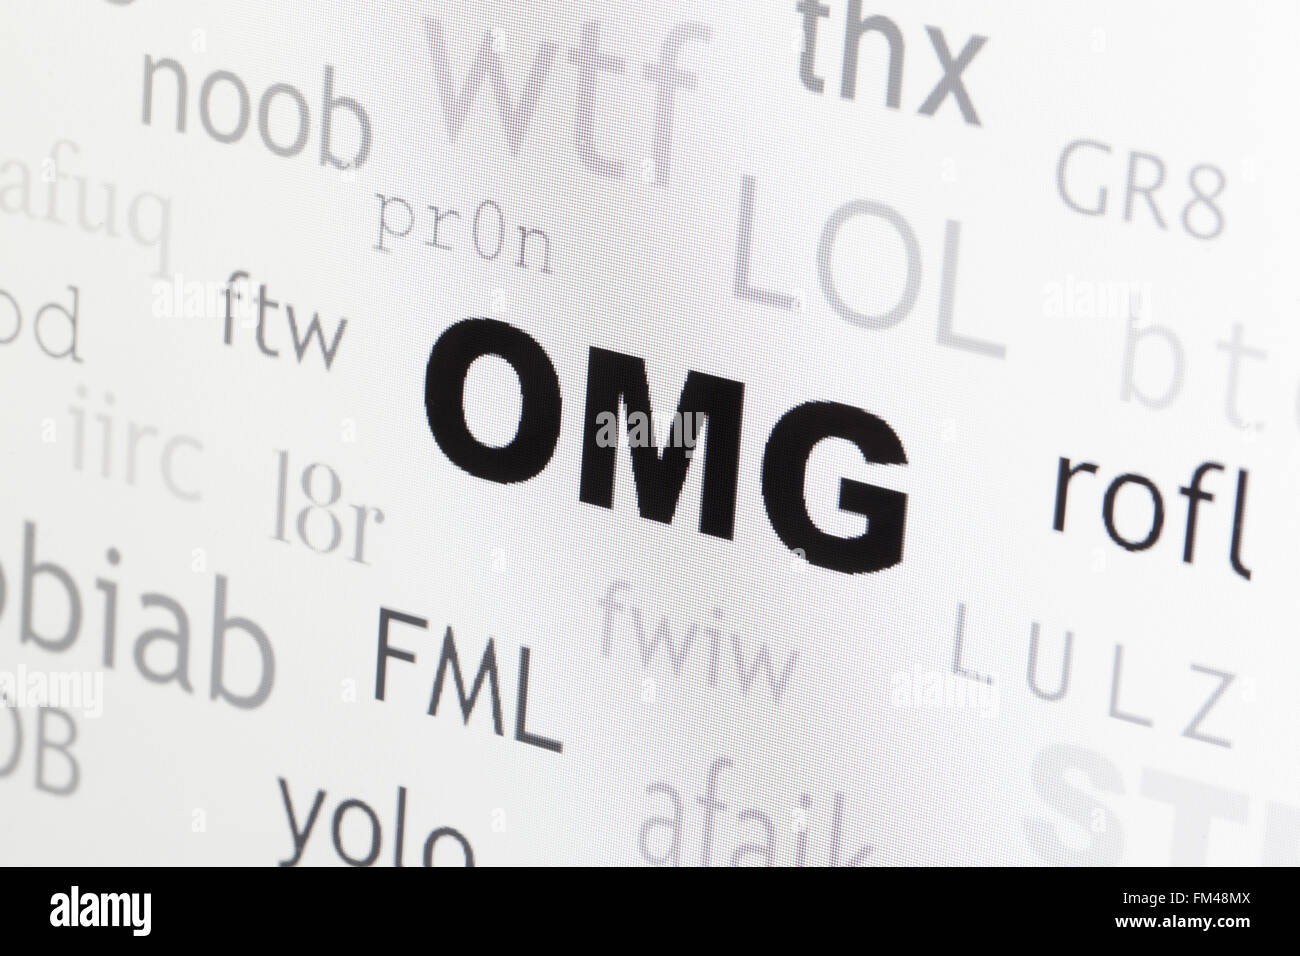 Internet Slang, Acronyms Including BRB, Be Right Back, LOL, Lots Of Laughs,  OMG, Oh My God, And TYT, Take Your Time Stock Photo, Picture and Royalty  Free Image. Image 145560201.